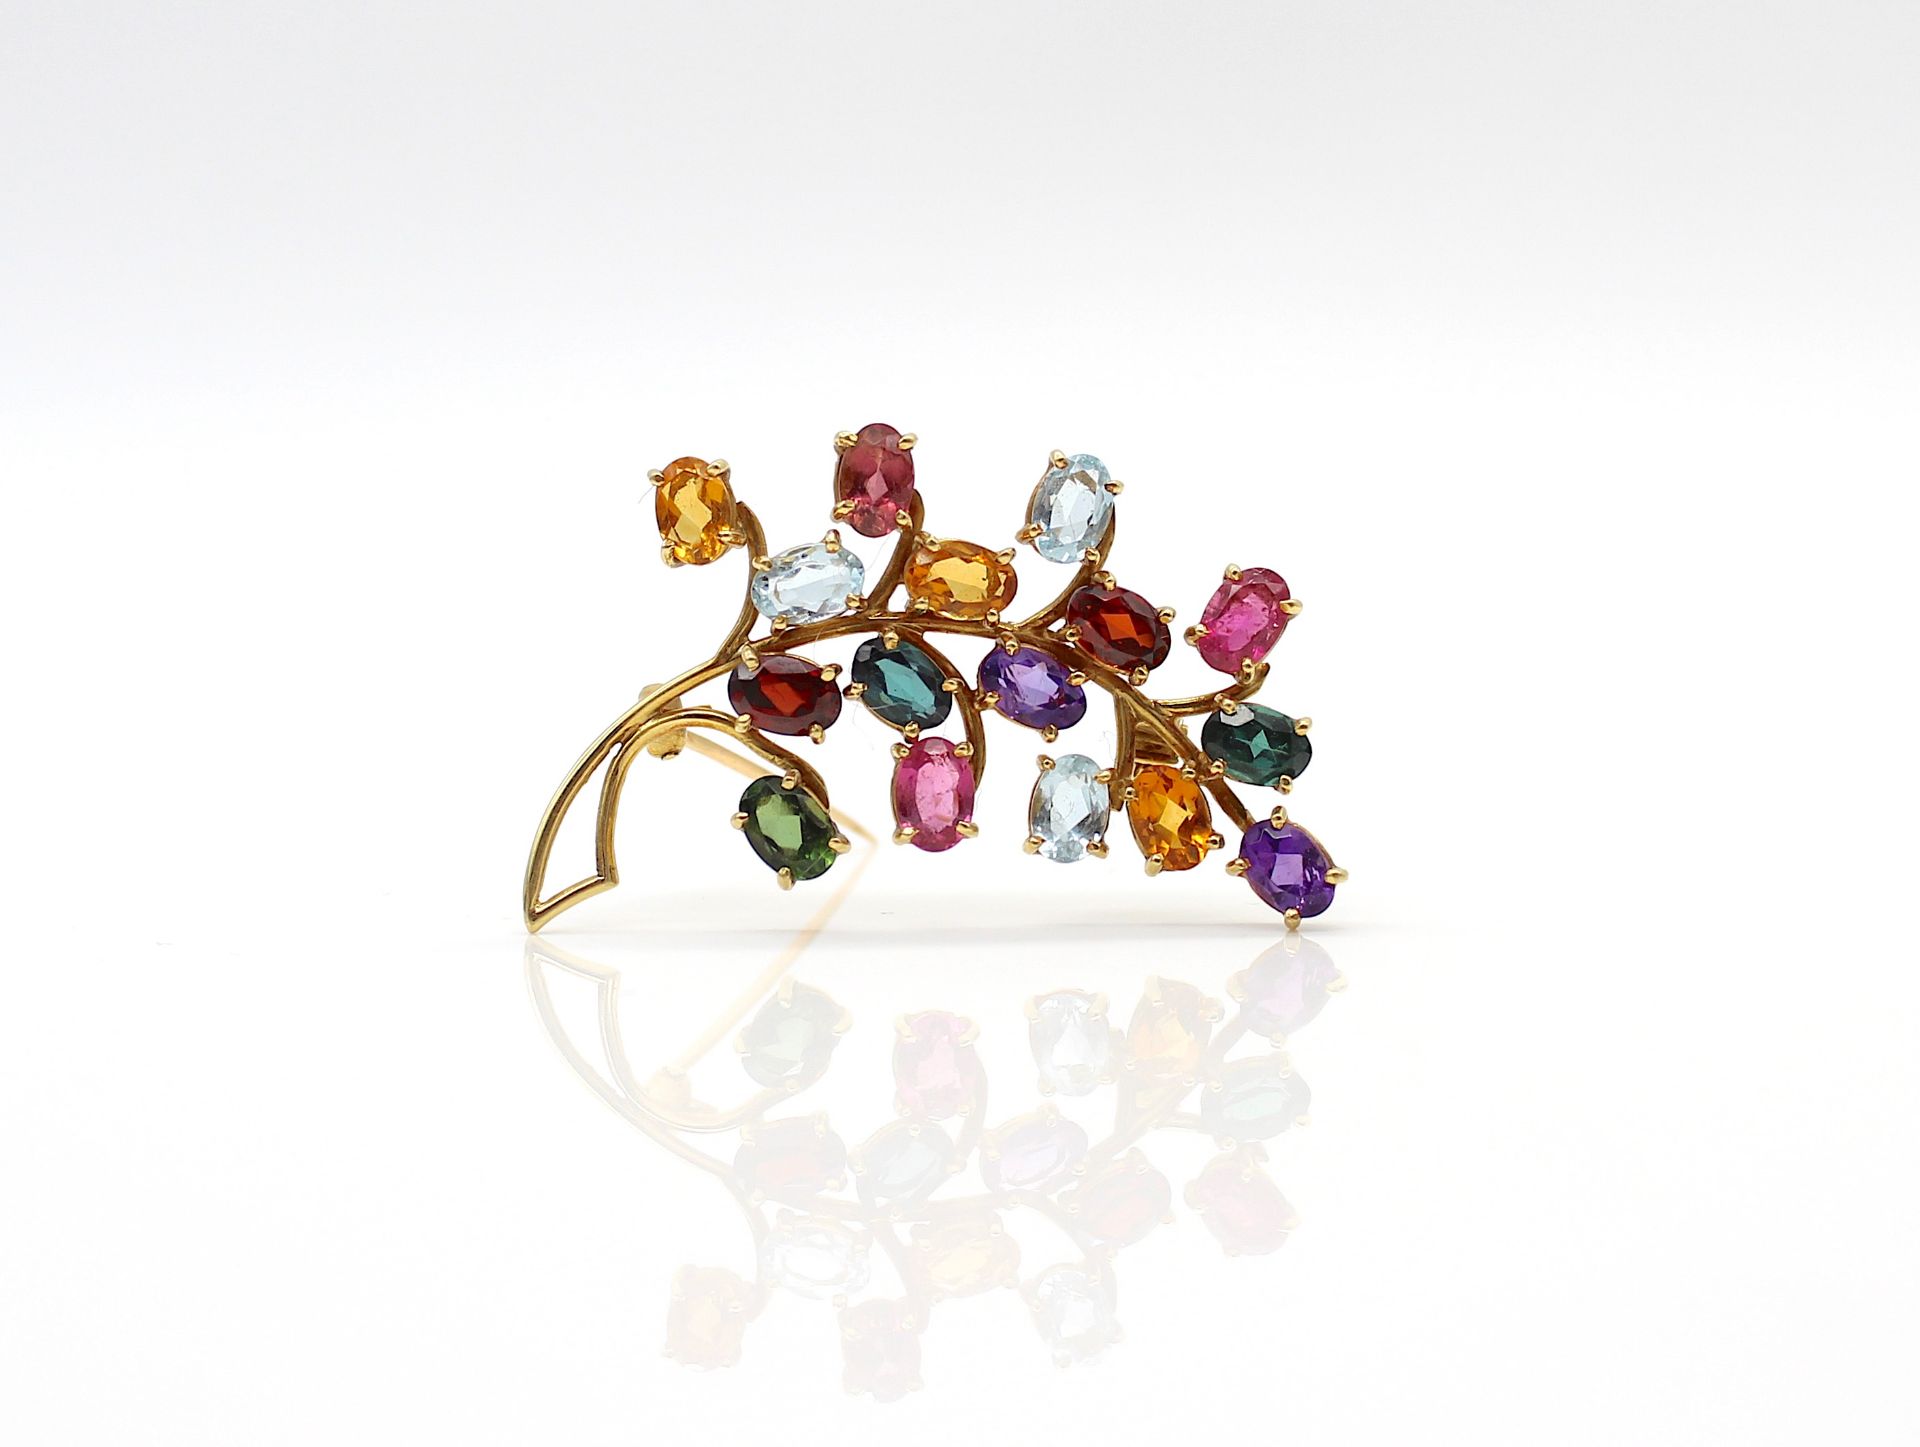 Brooch with colourful gemstones - Image 2 of 3